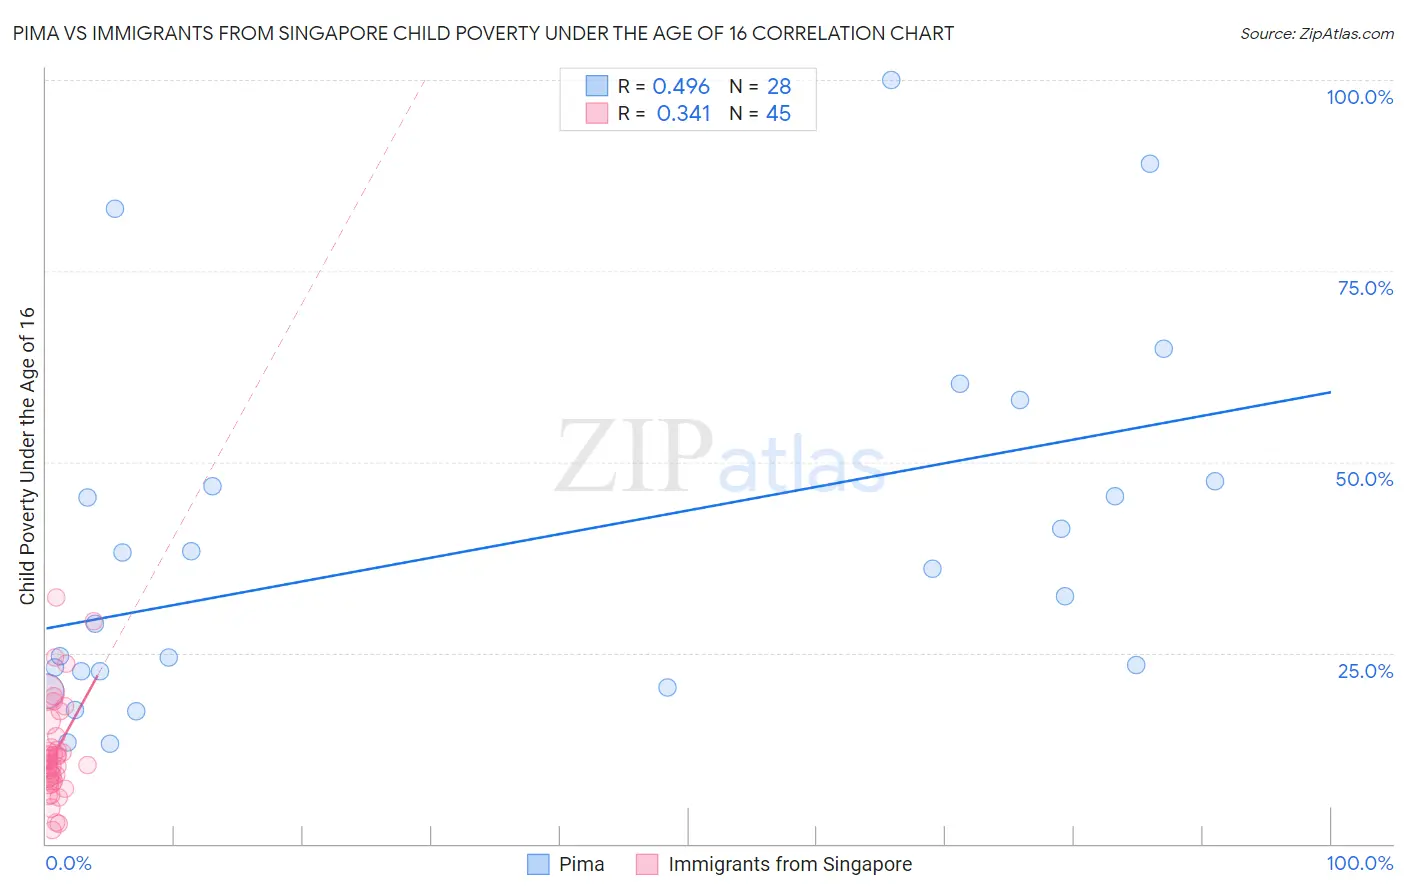 Pima vs Immigrants from Singapore Child Poverty Under the Age of 16